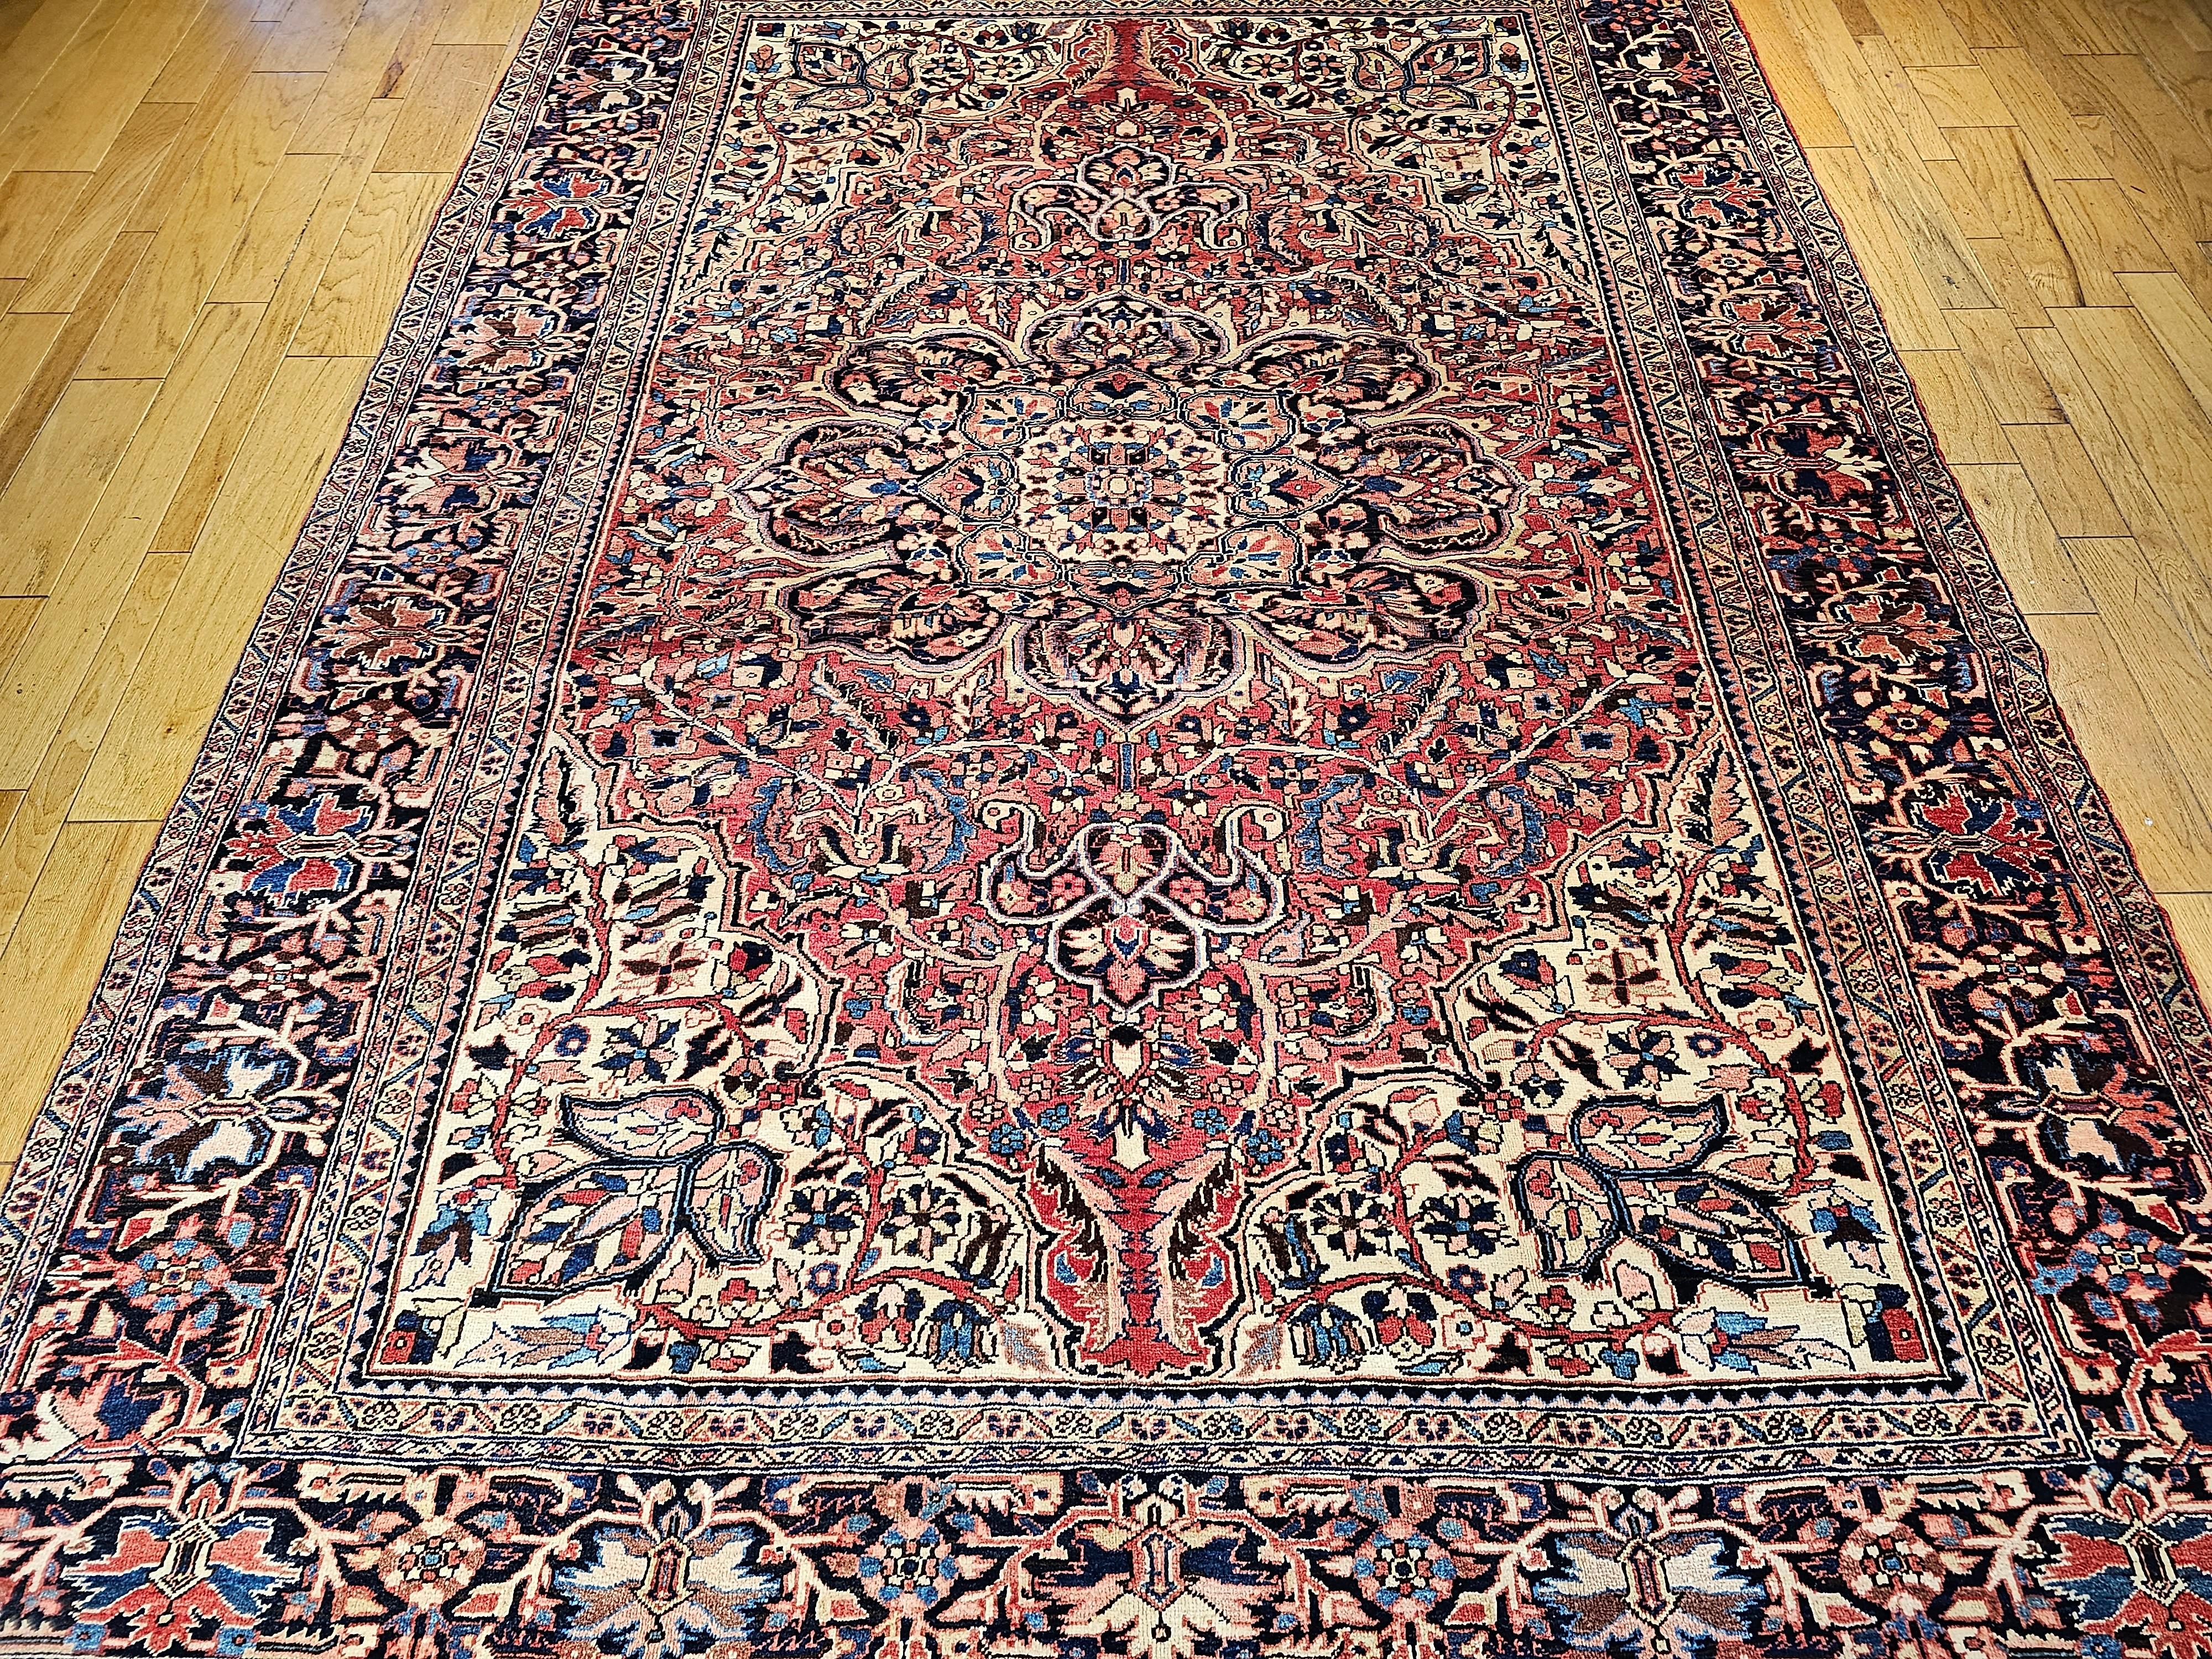 A room-size Persian Heriz from the Azerbaijan region of Northwest Persia from the mid 1900s. This Heriz rug has a beautiful rustic red background on which a wonderful array of colors are used.  The room-size Heriz rug has a large central medallion